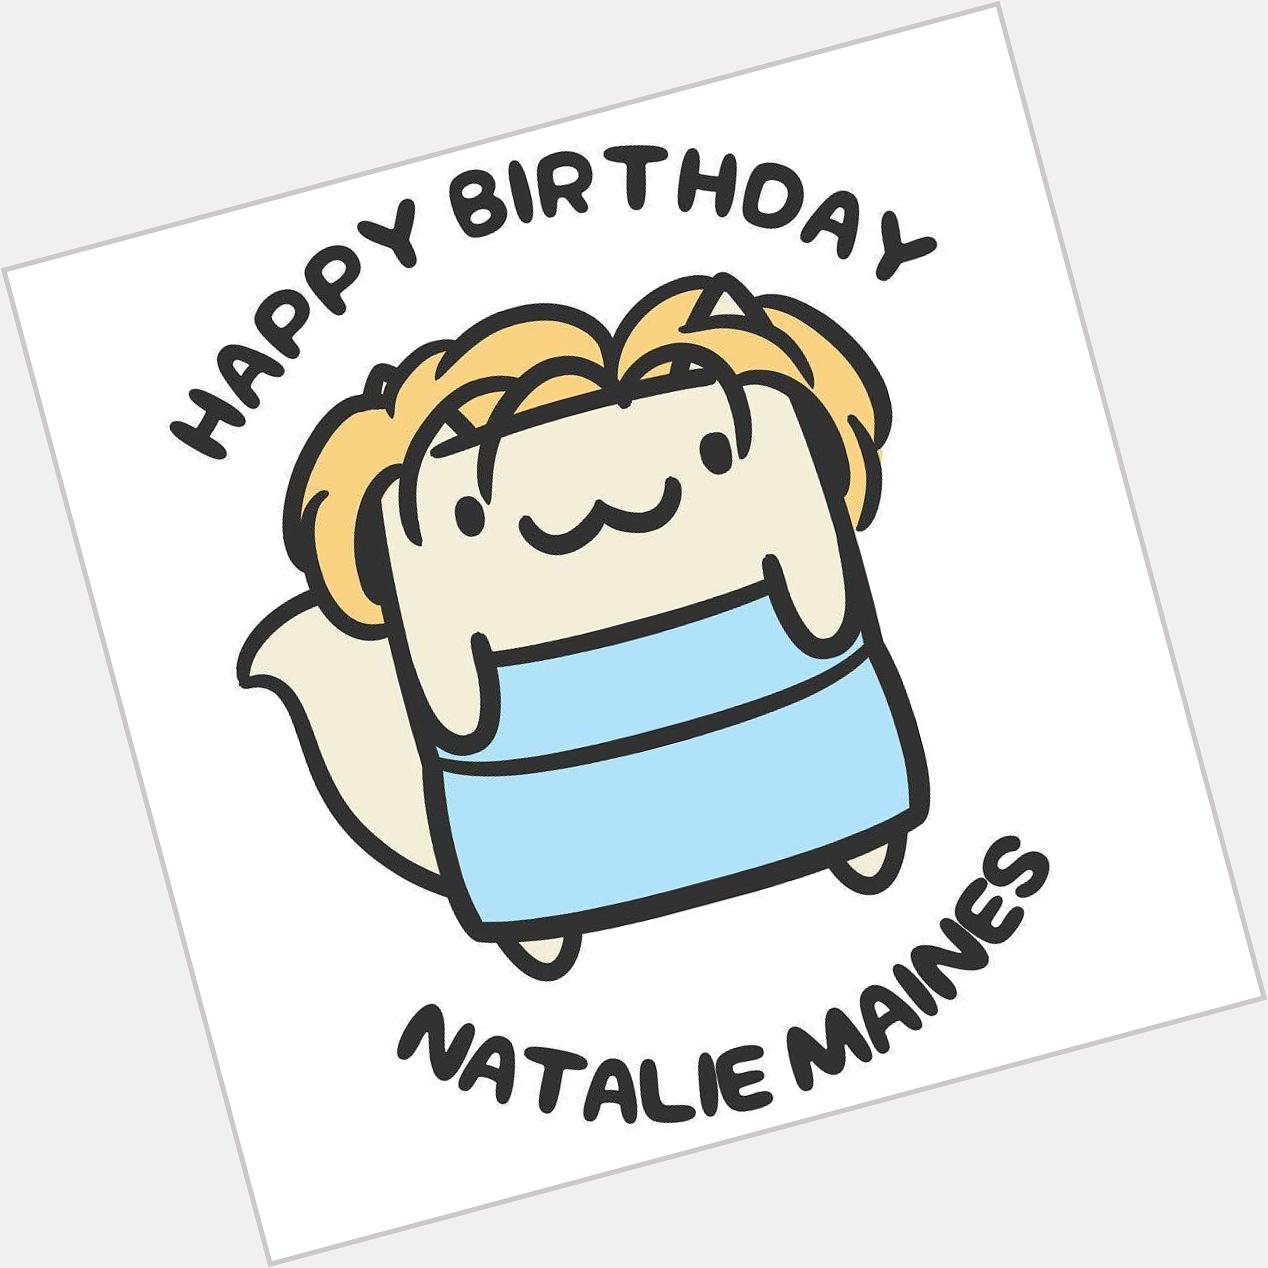 Happy Birthday, Natalie Maines! I was a teen girl in Texas in the 90s, therefore I loved T 